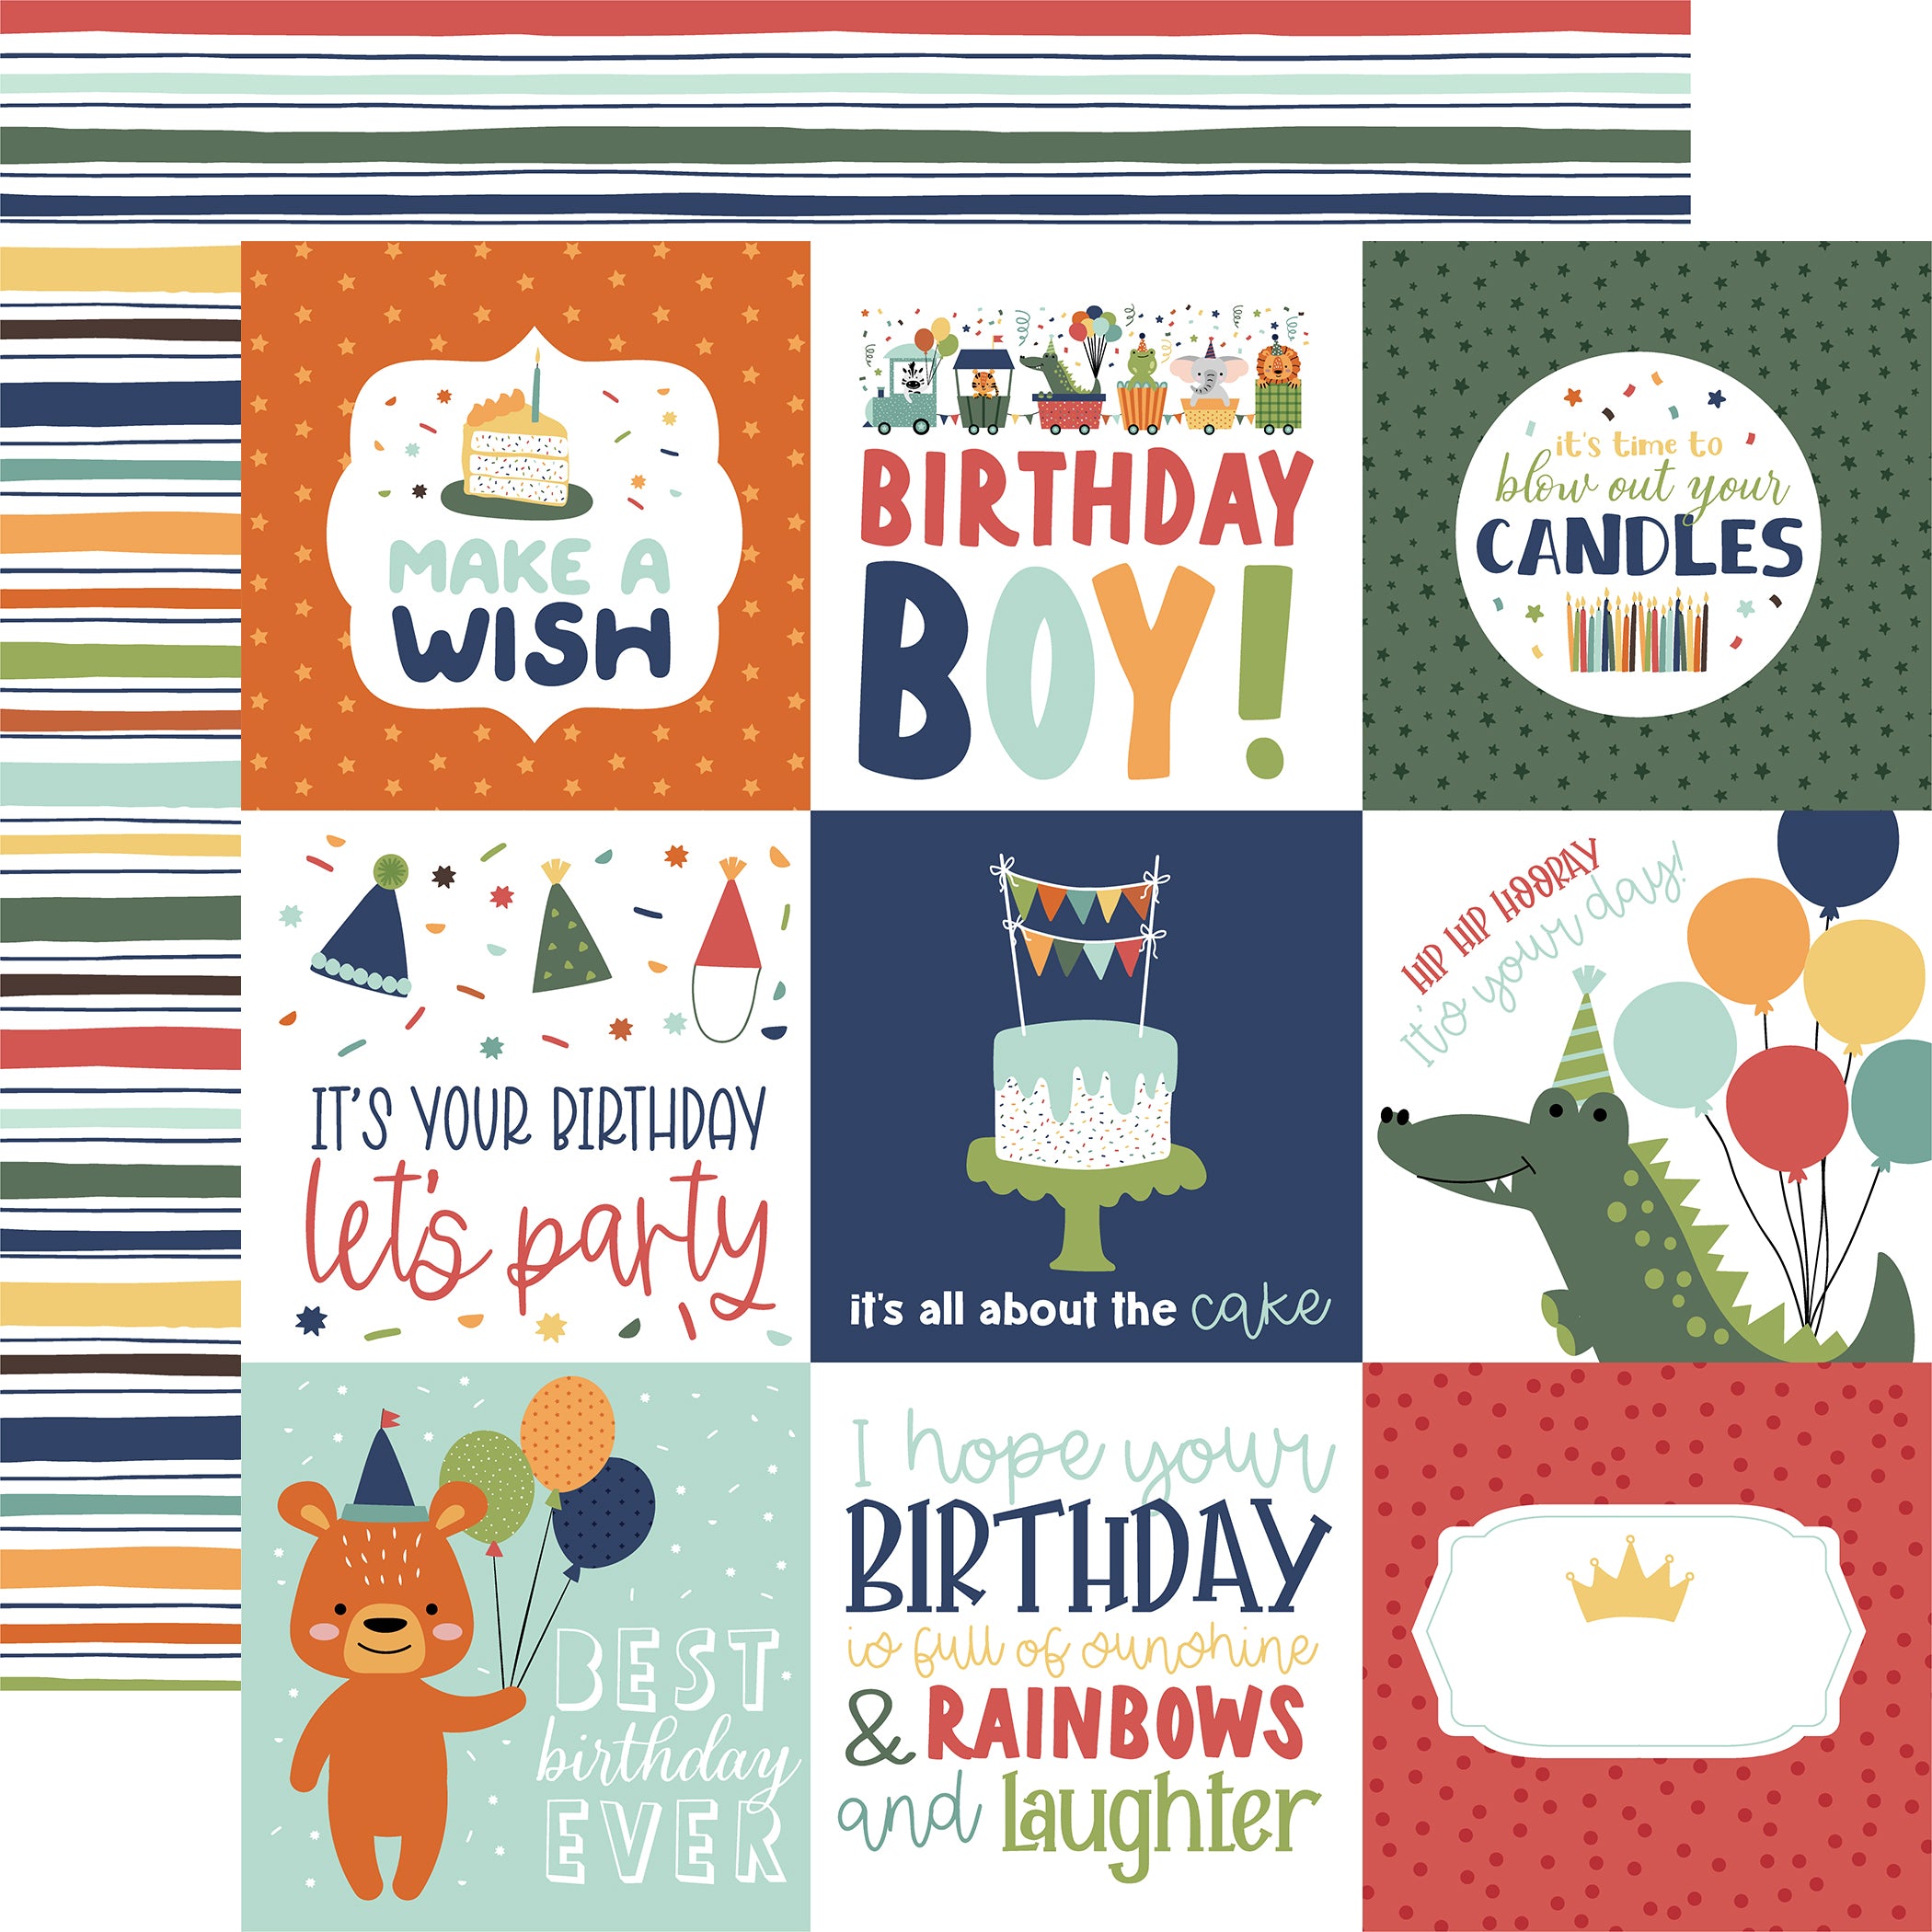 A Birthday Wish Boy Collection 13-Piece Collection Kit by Echo Park Paper-12 Papers, 1 Sticker